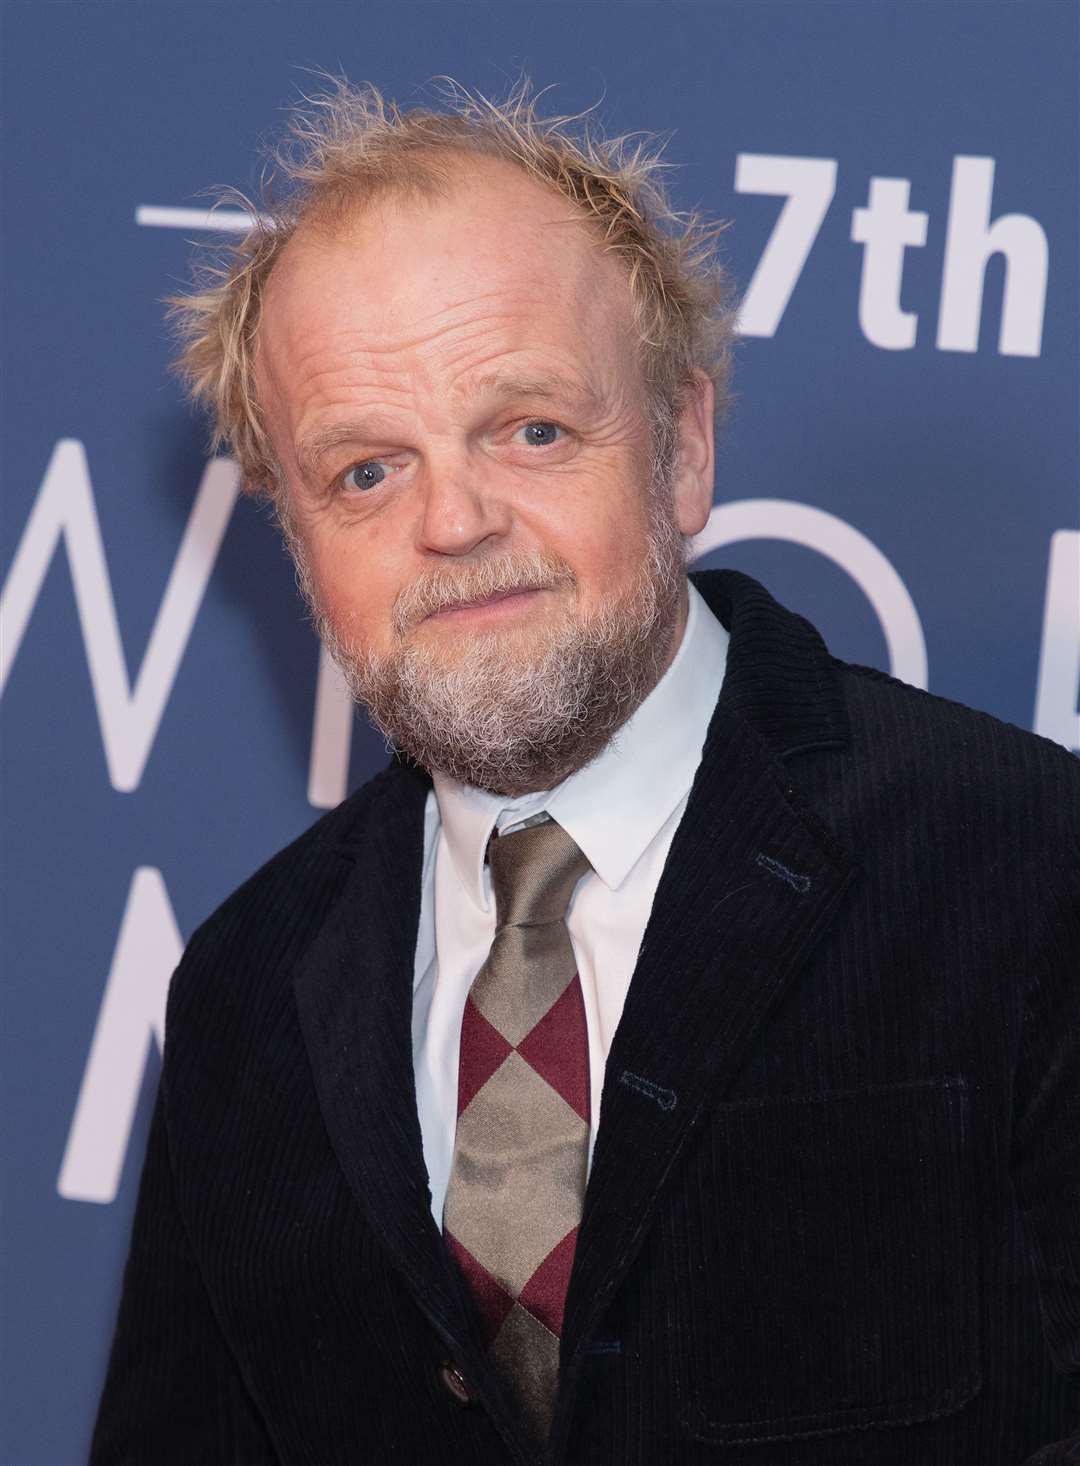 Toby Jones stars as Alan Bates in the series (Suzan Moore/PA)